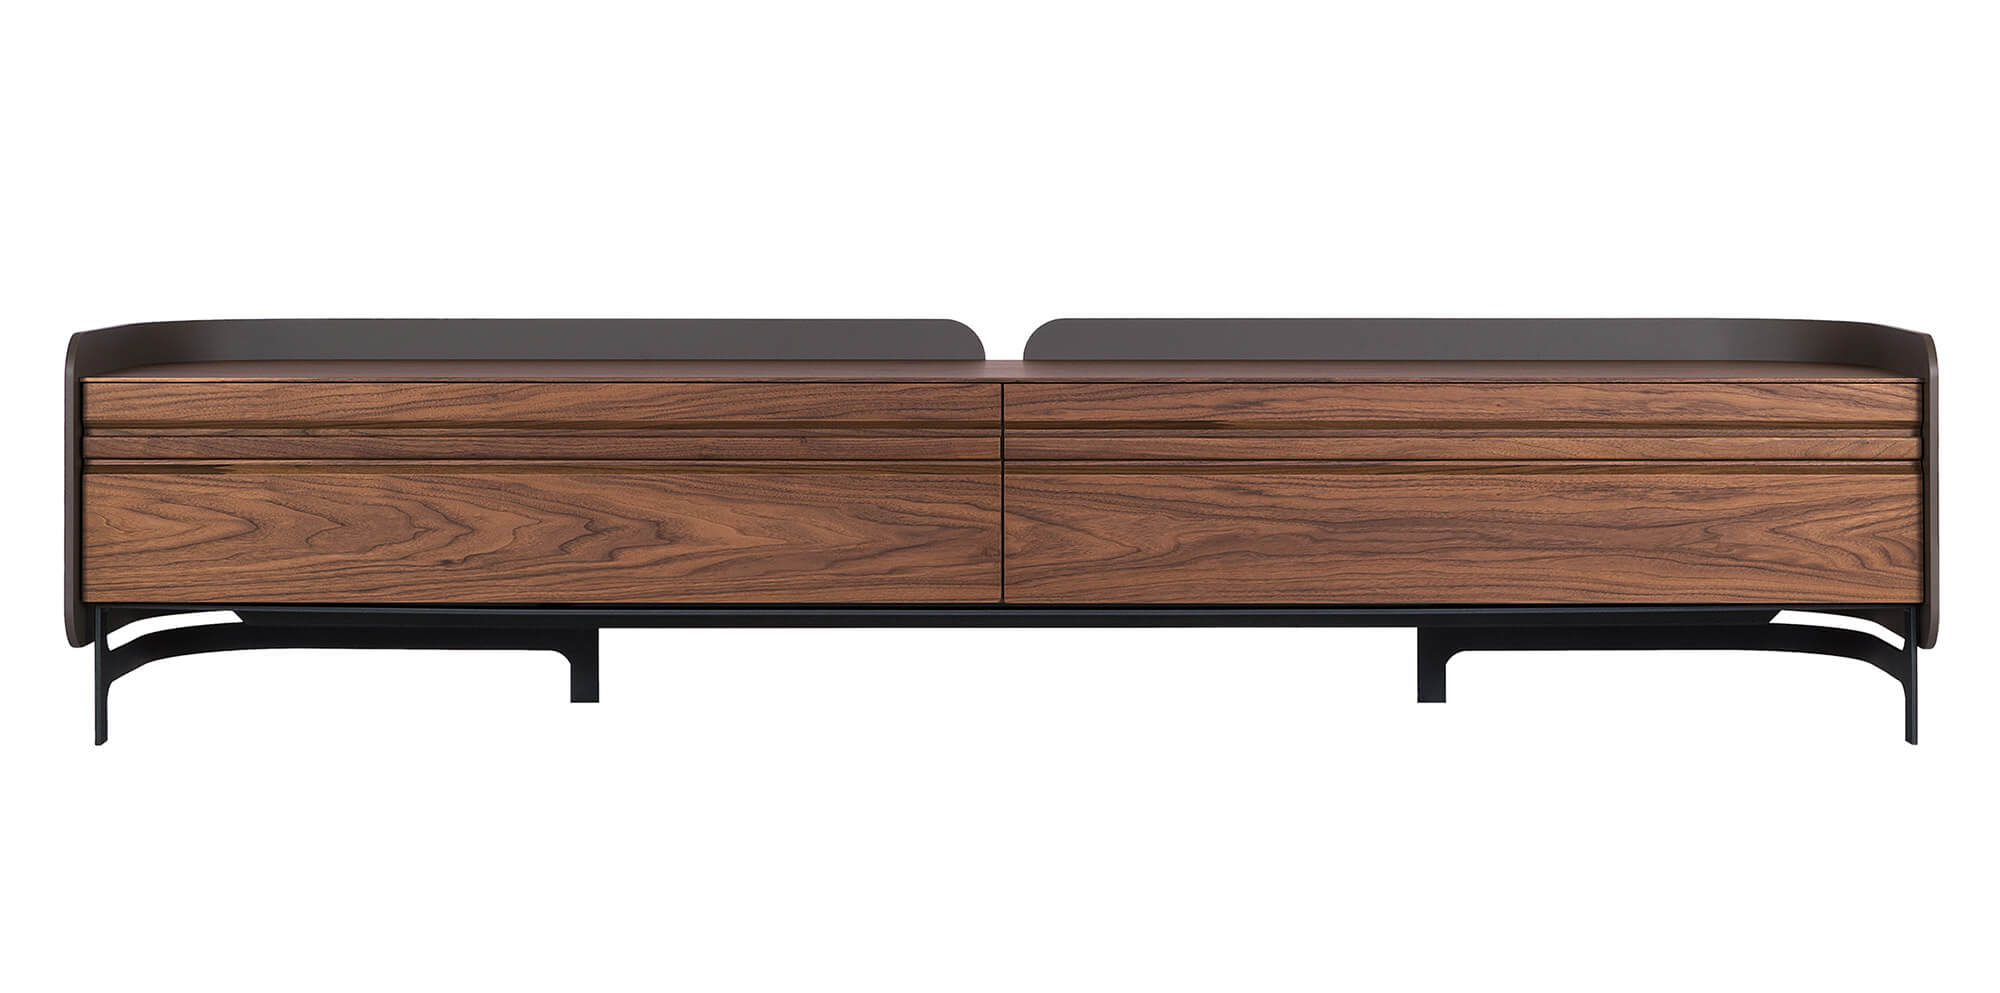 Wood-oo Tv Unit in walnut and back in lacquer. al2